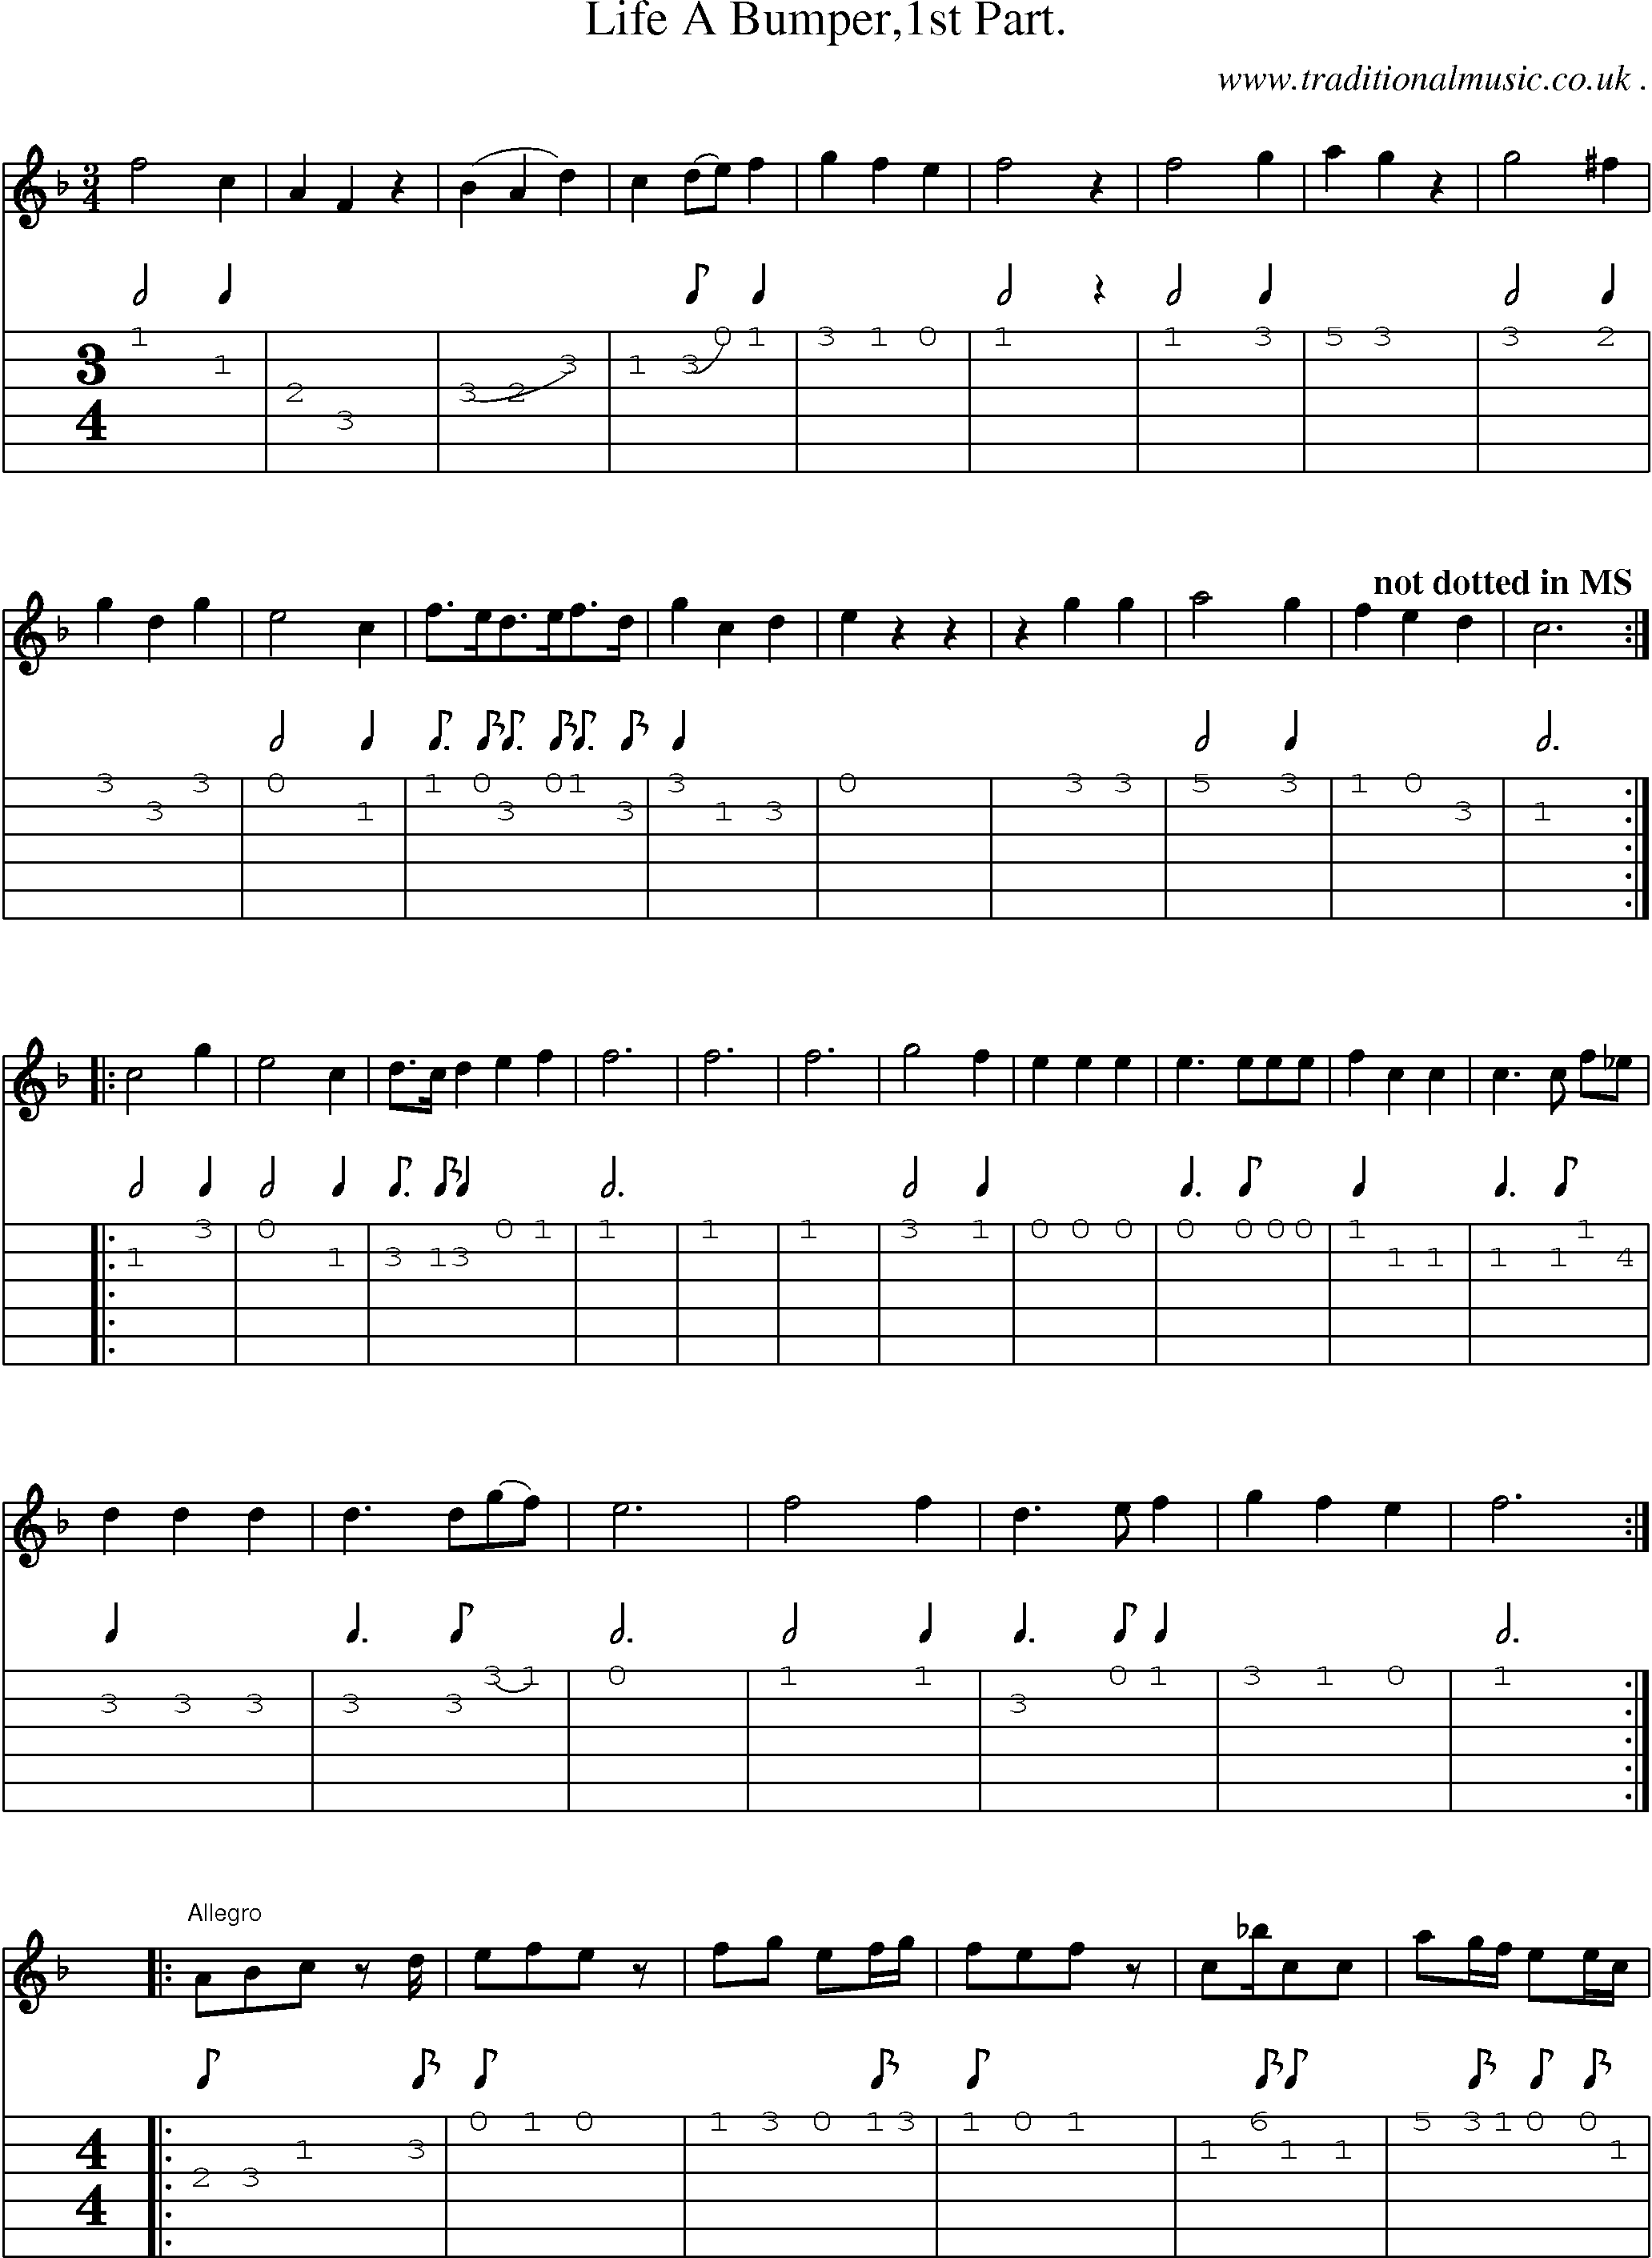 Sheet-Music and Guitar Tabs for Life A Bumper1st Part